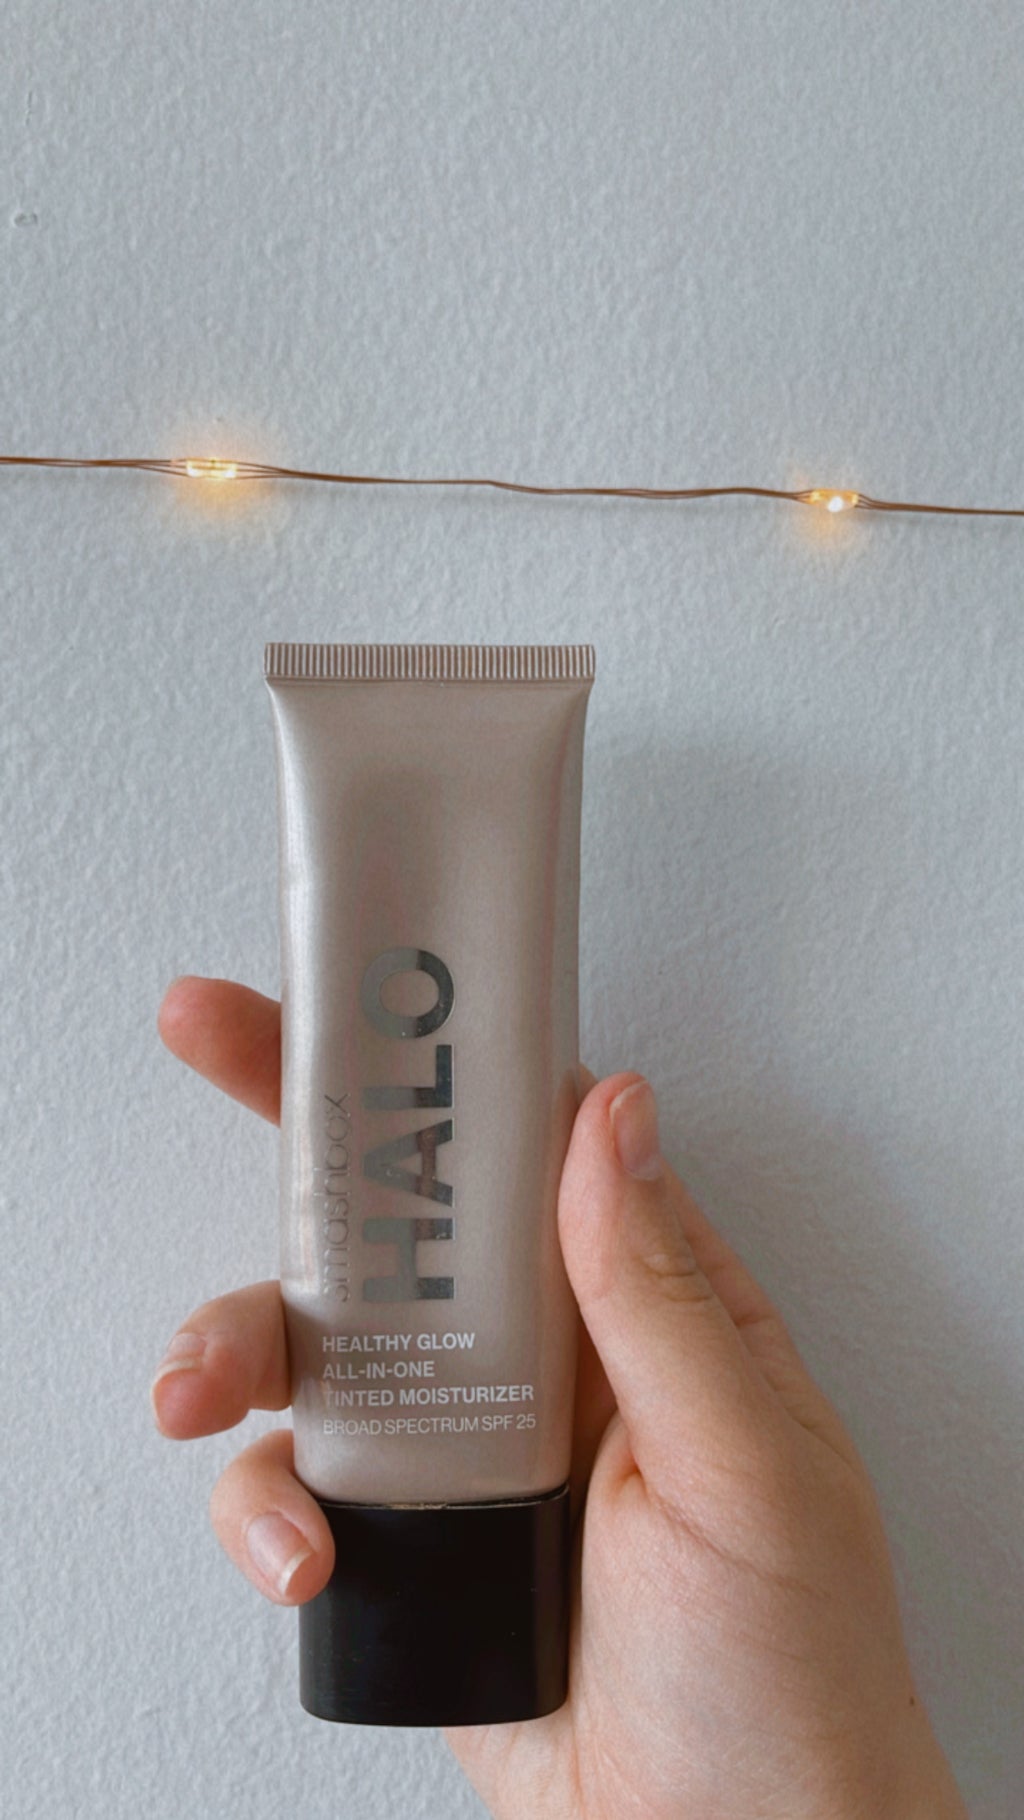 This is an image of the Halo Tinted Moisturizer for my Self Care Sundays Series.